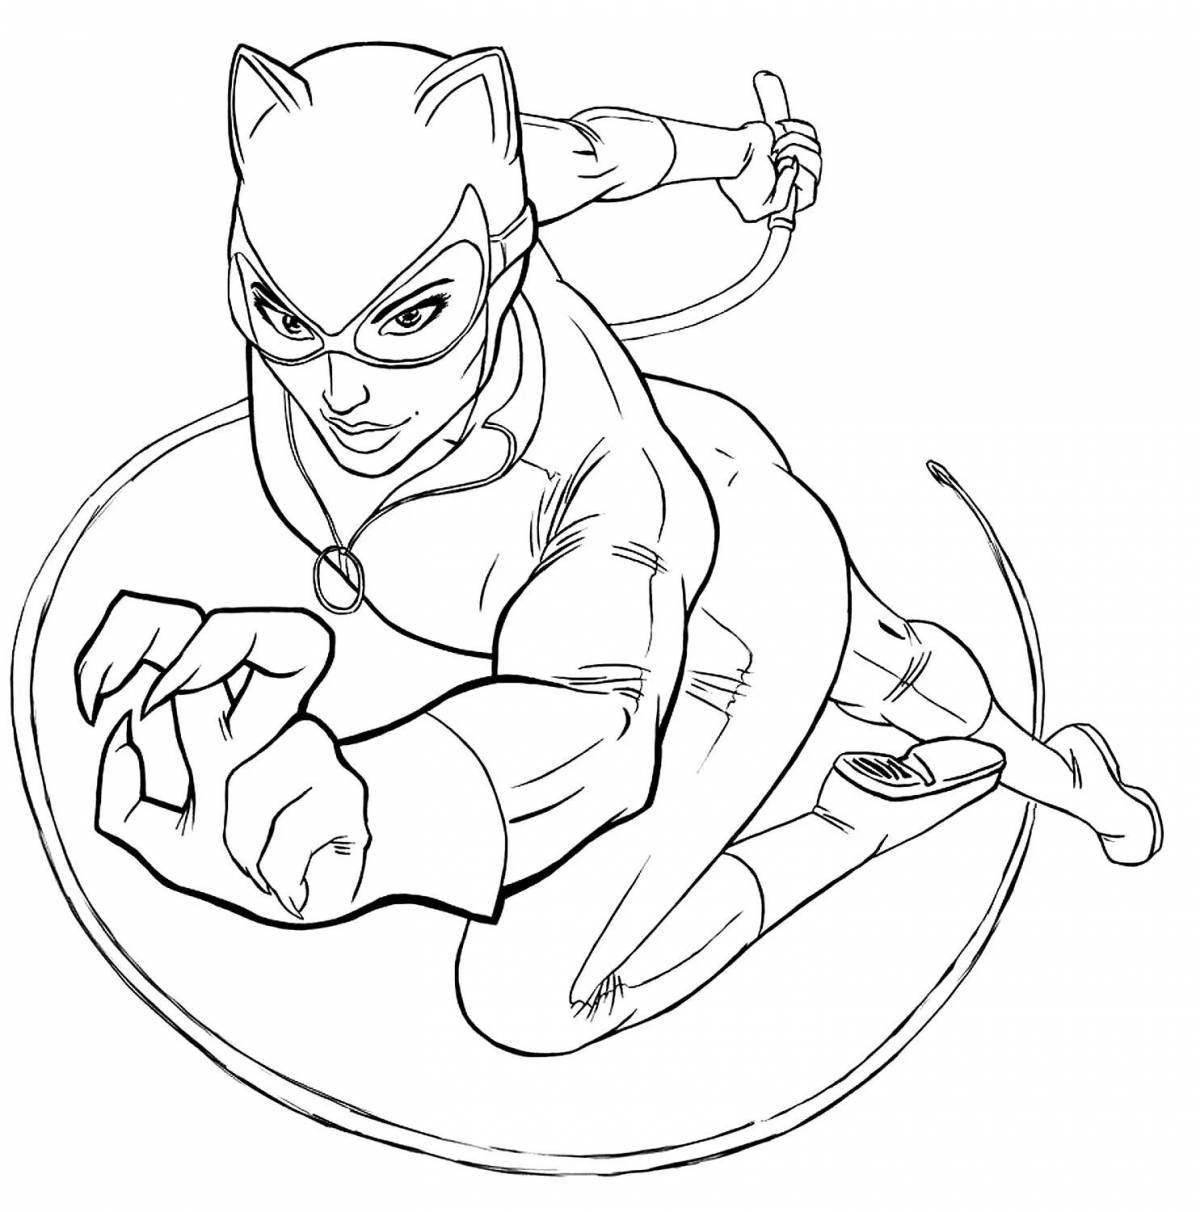 Fabulous batman and catwoman coloring page